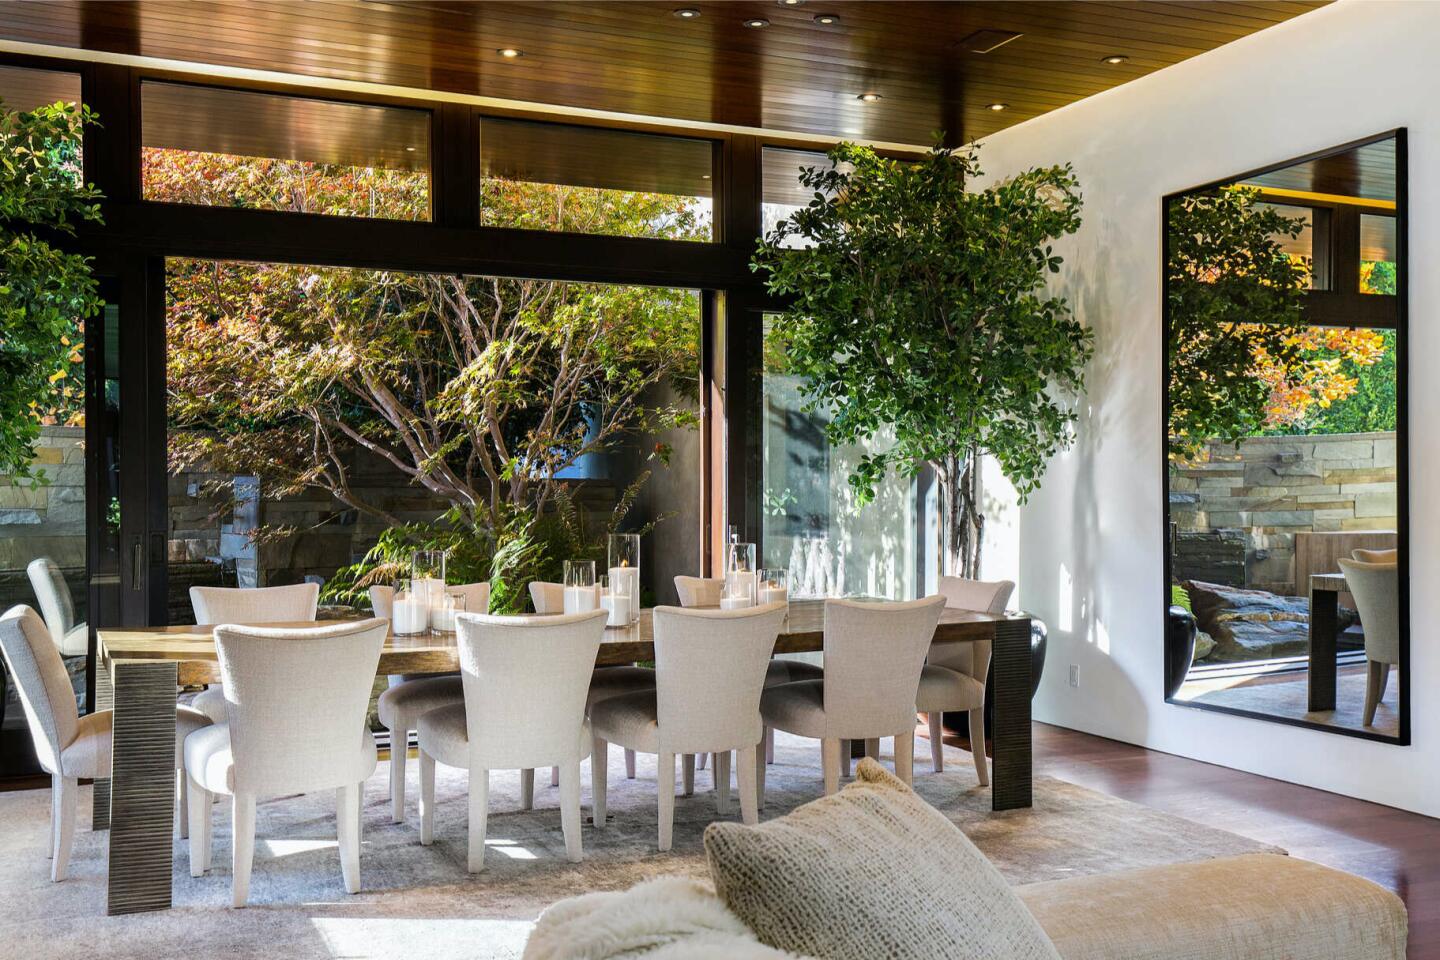 The furnished dining room with big windows overlooking trees.